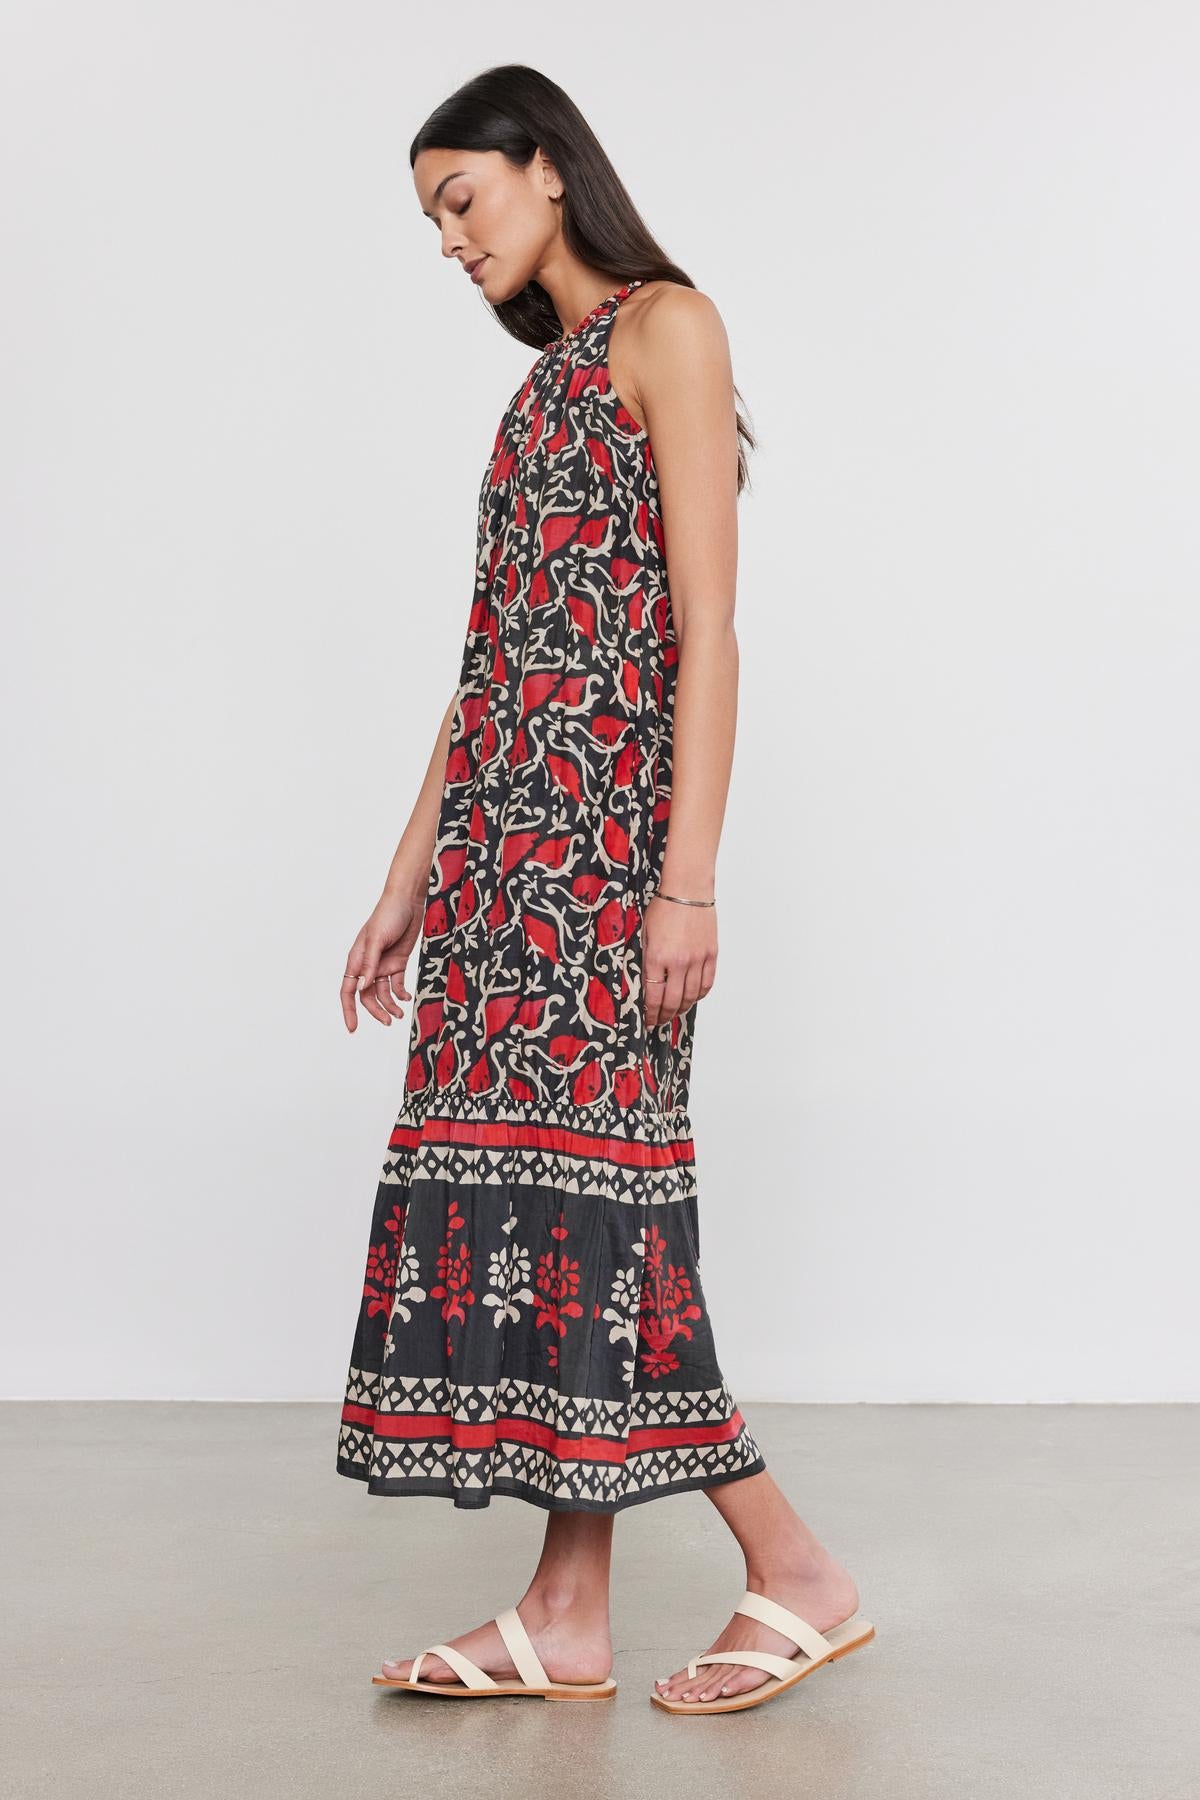 A woman wearing a sleeveless, ankle-length GHITA DRESS by Velvet by Graham & Spencer with a red, black, and white ethnic print, paired with white sandals, stands looking down.-36910024491201